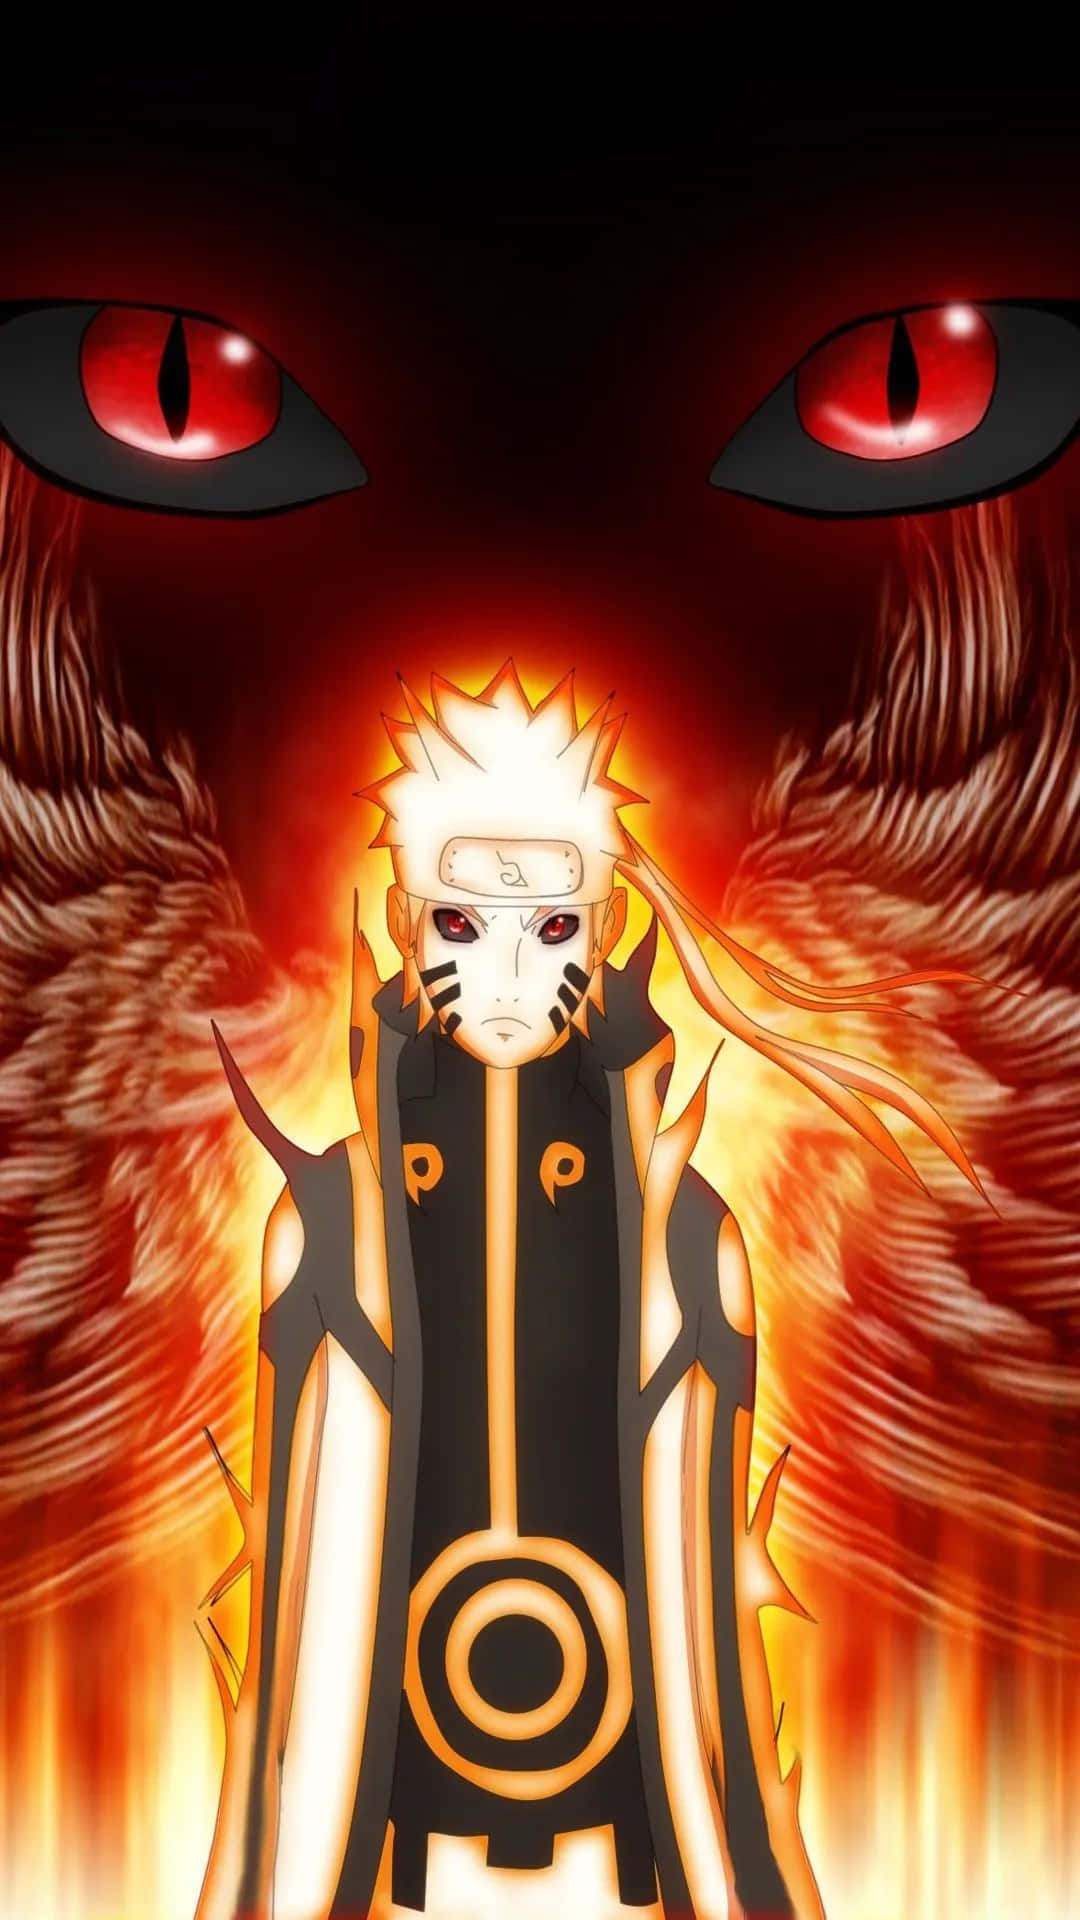 Naruto unleashed the Kyuubi!